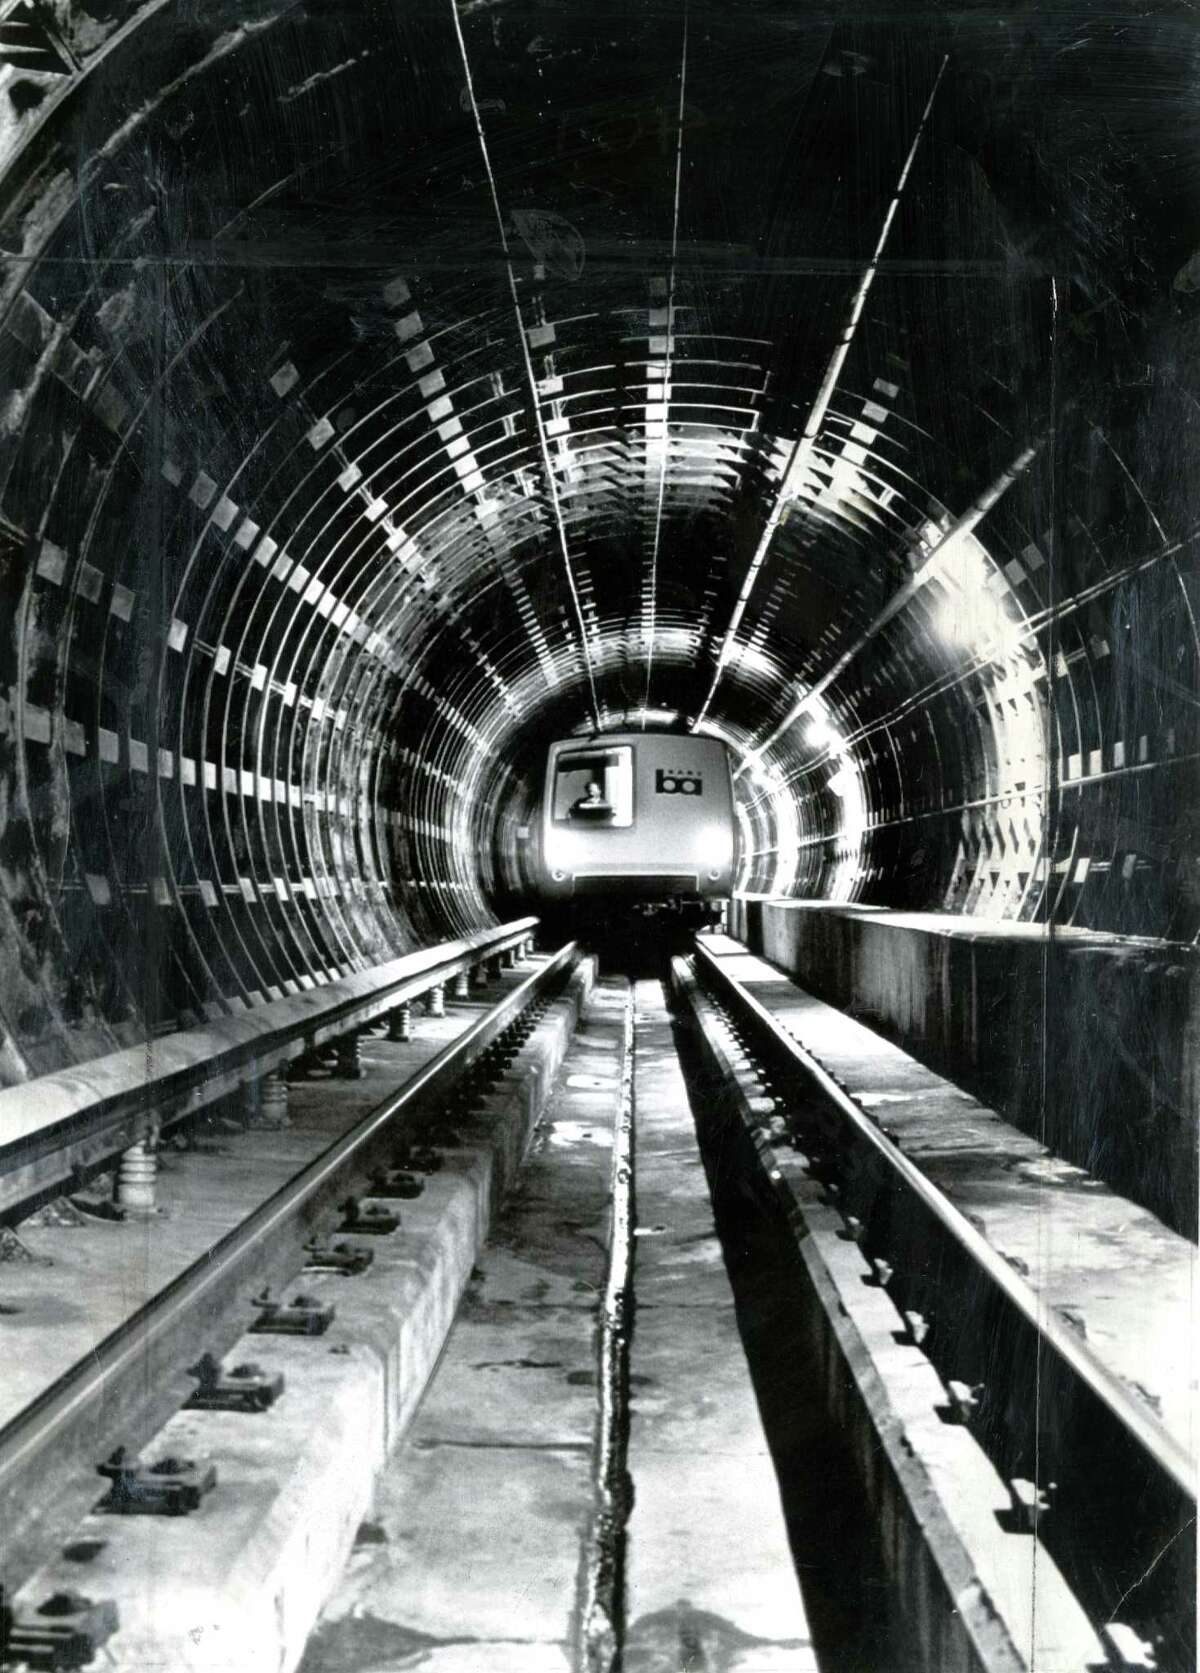 April 3, 1974: BART officials send a train through the Transbay Tube as one of the last tests before allowing passengers on the system.